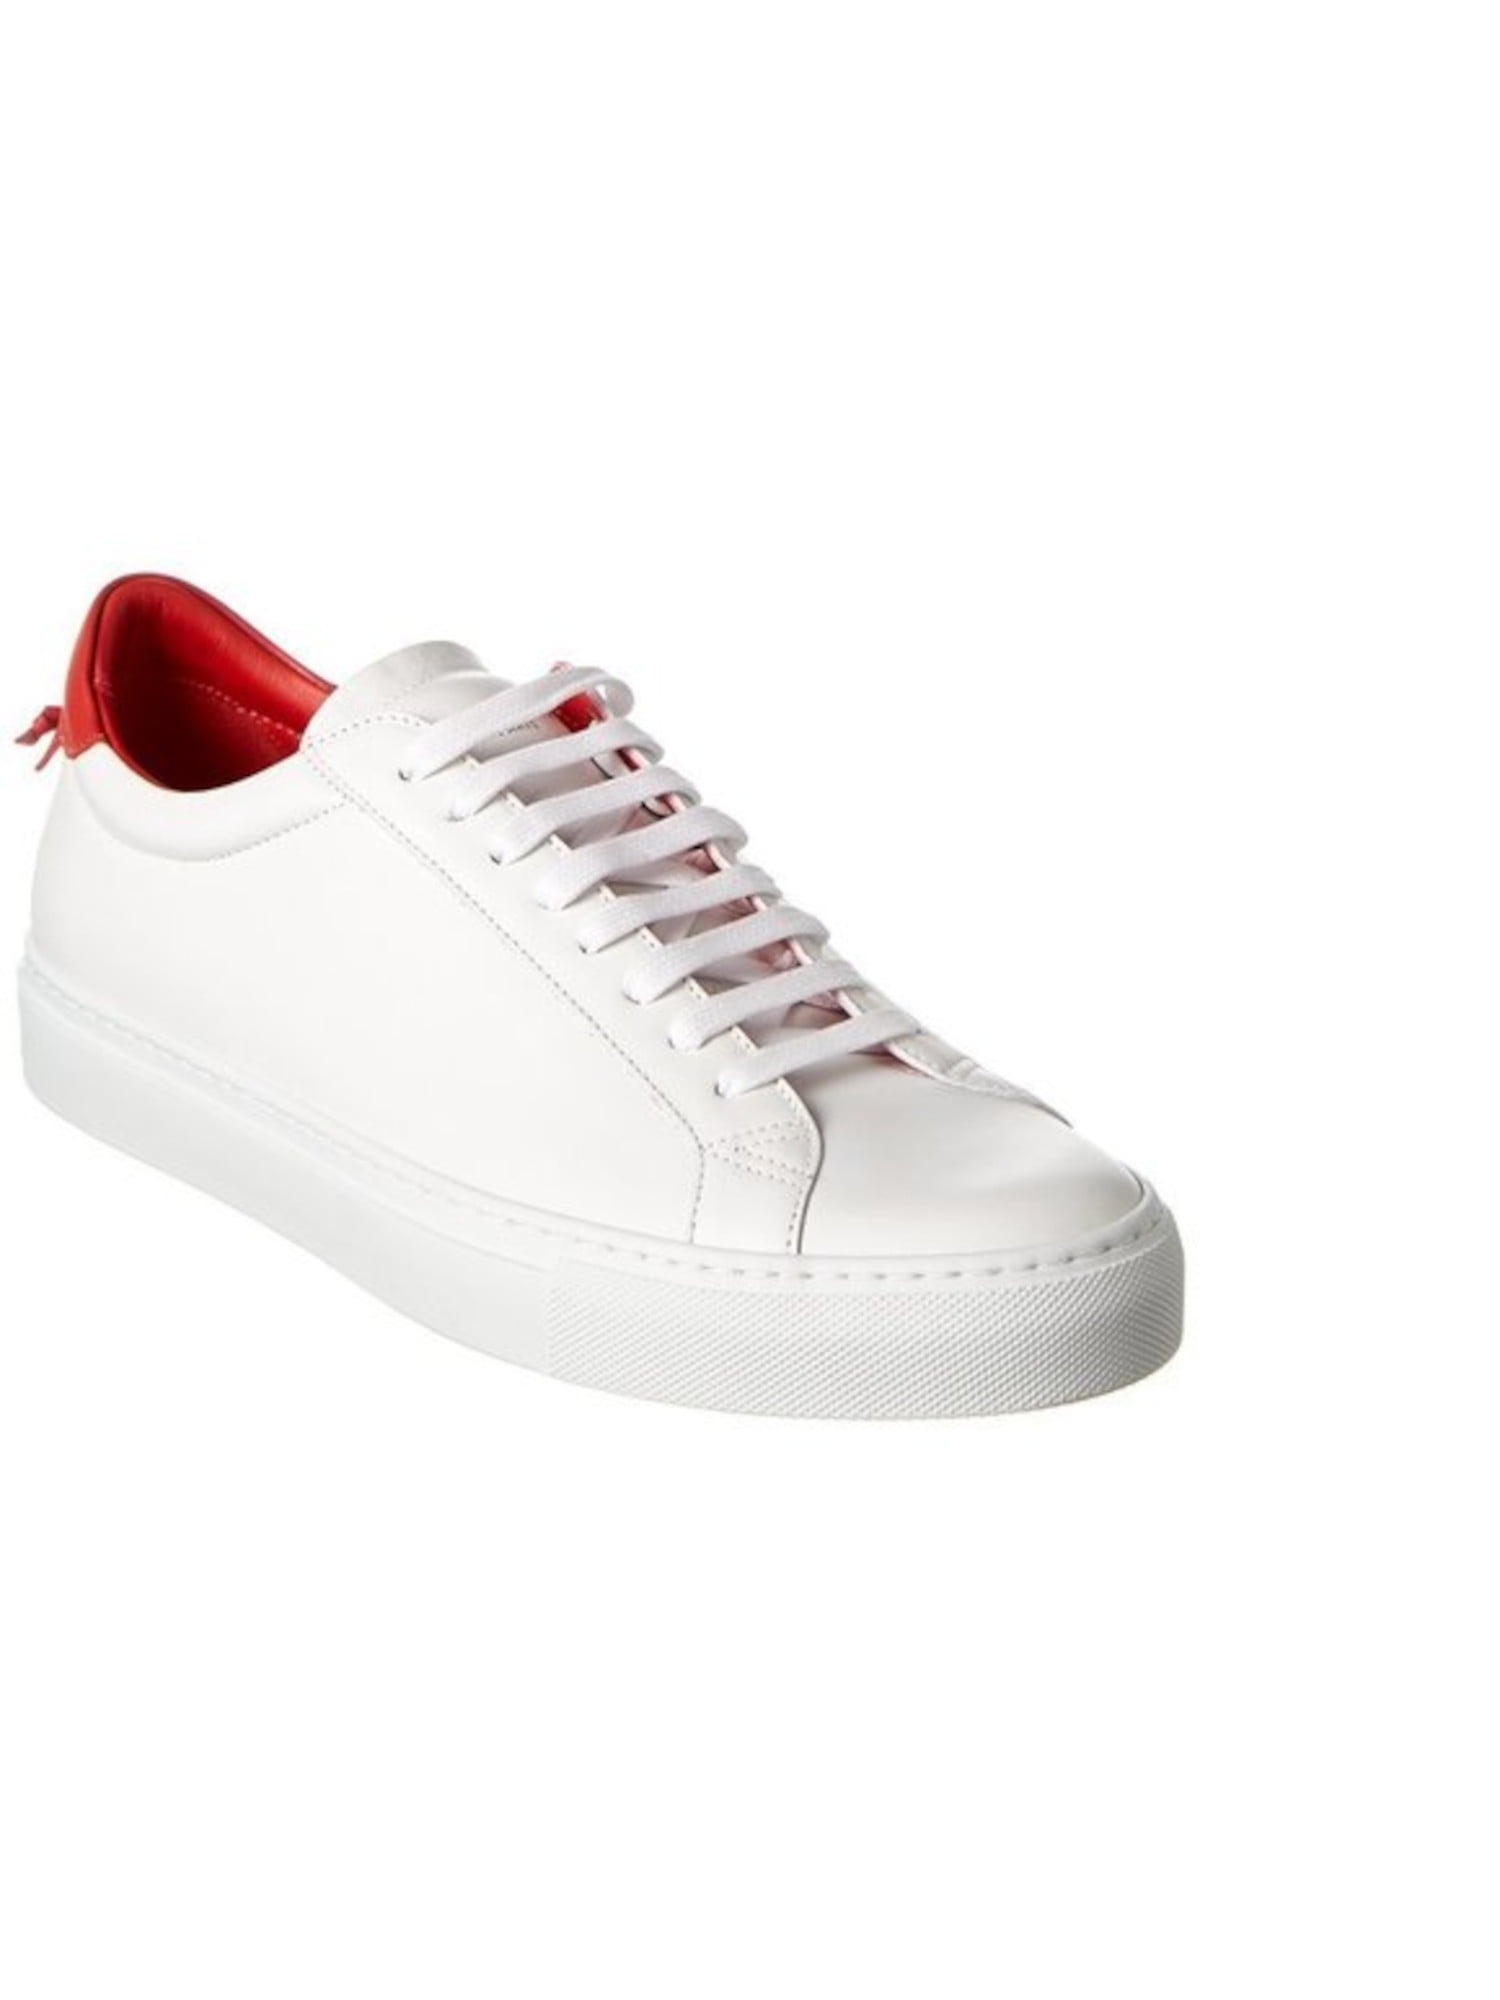 Givenchy Kids logo-strap Leather Sneakers - Farfetch